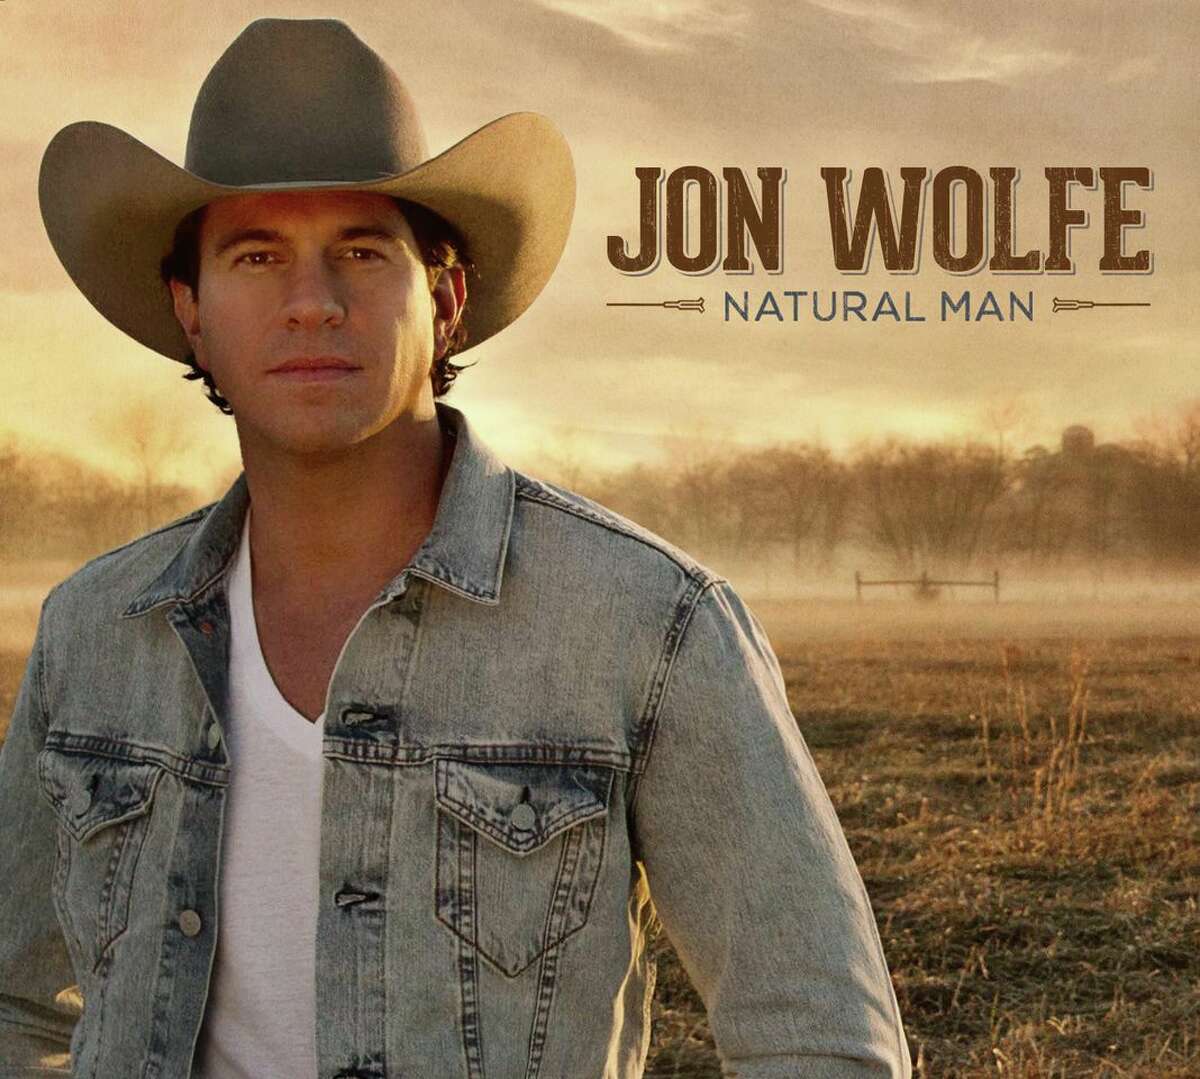 Cover art for "Natural Man" by Jon Wolfe.